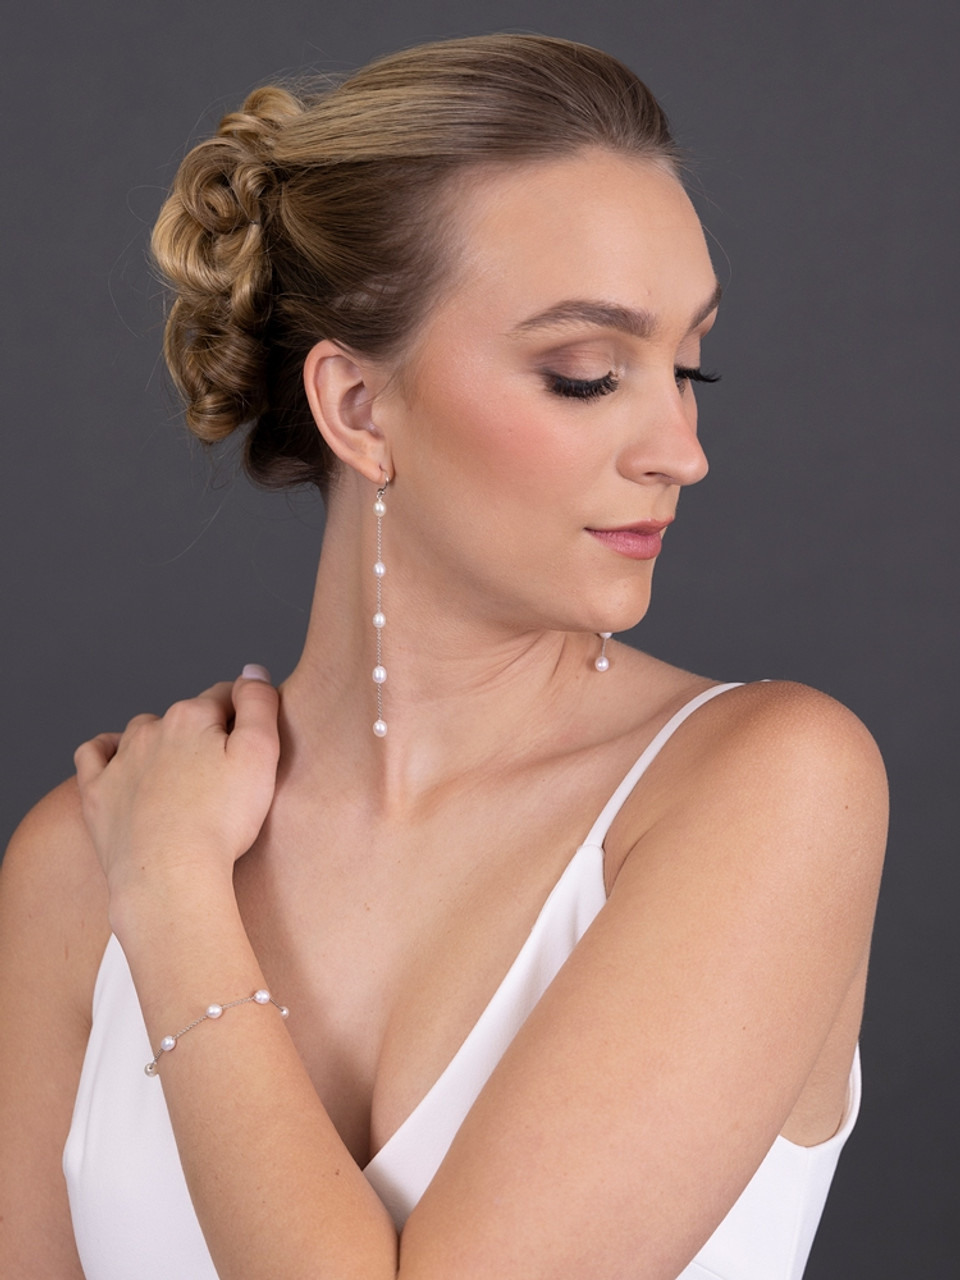 Mariell Bridals Top Selling Ivory Freshwater "Floating Pearl" Bracelet on Thin Link Chain in Platinum Plating 4673B-I-S